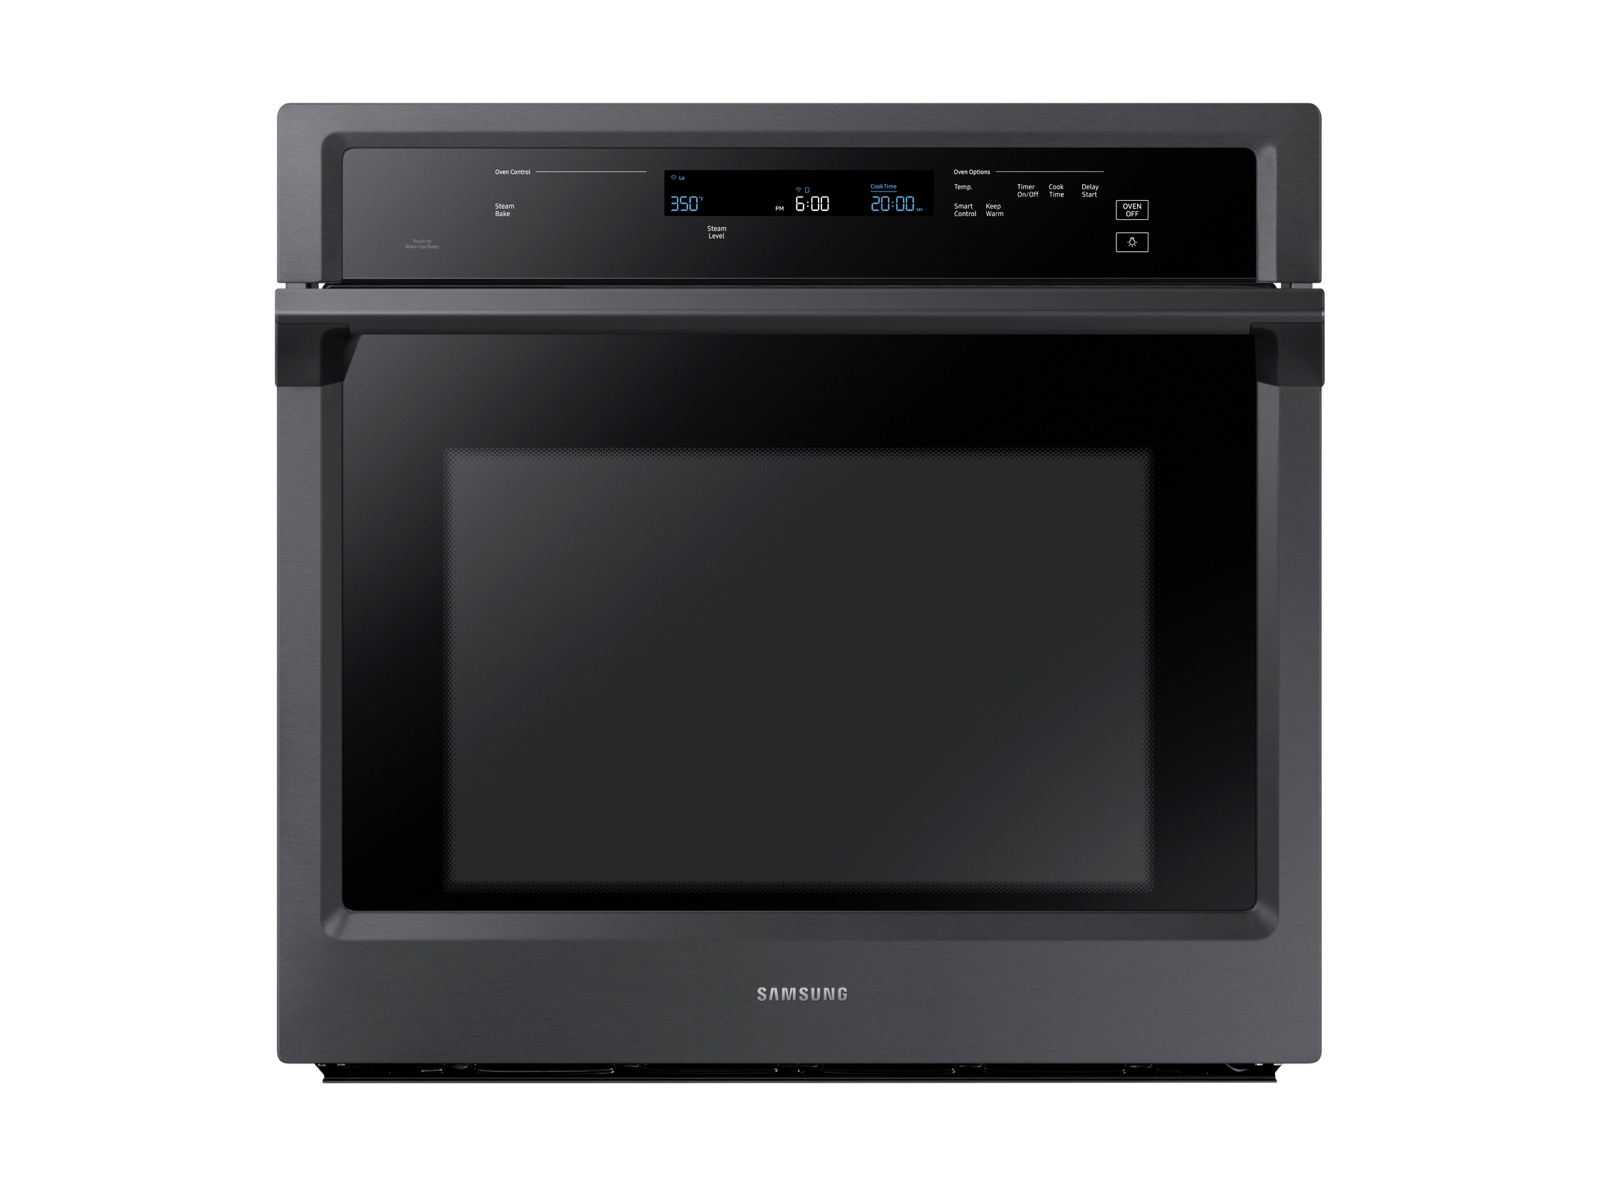 Samsung 30" Smart Single Electric Wall Oven with Steam Cook in Black Stainless Steel(NV51K6650SG/AA)